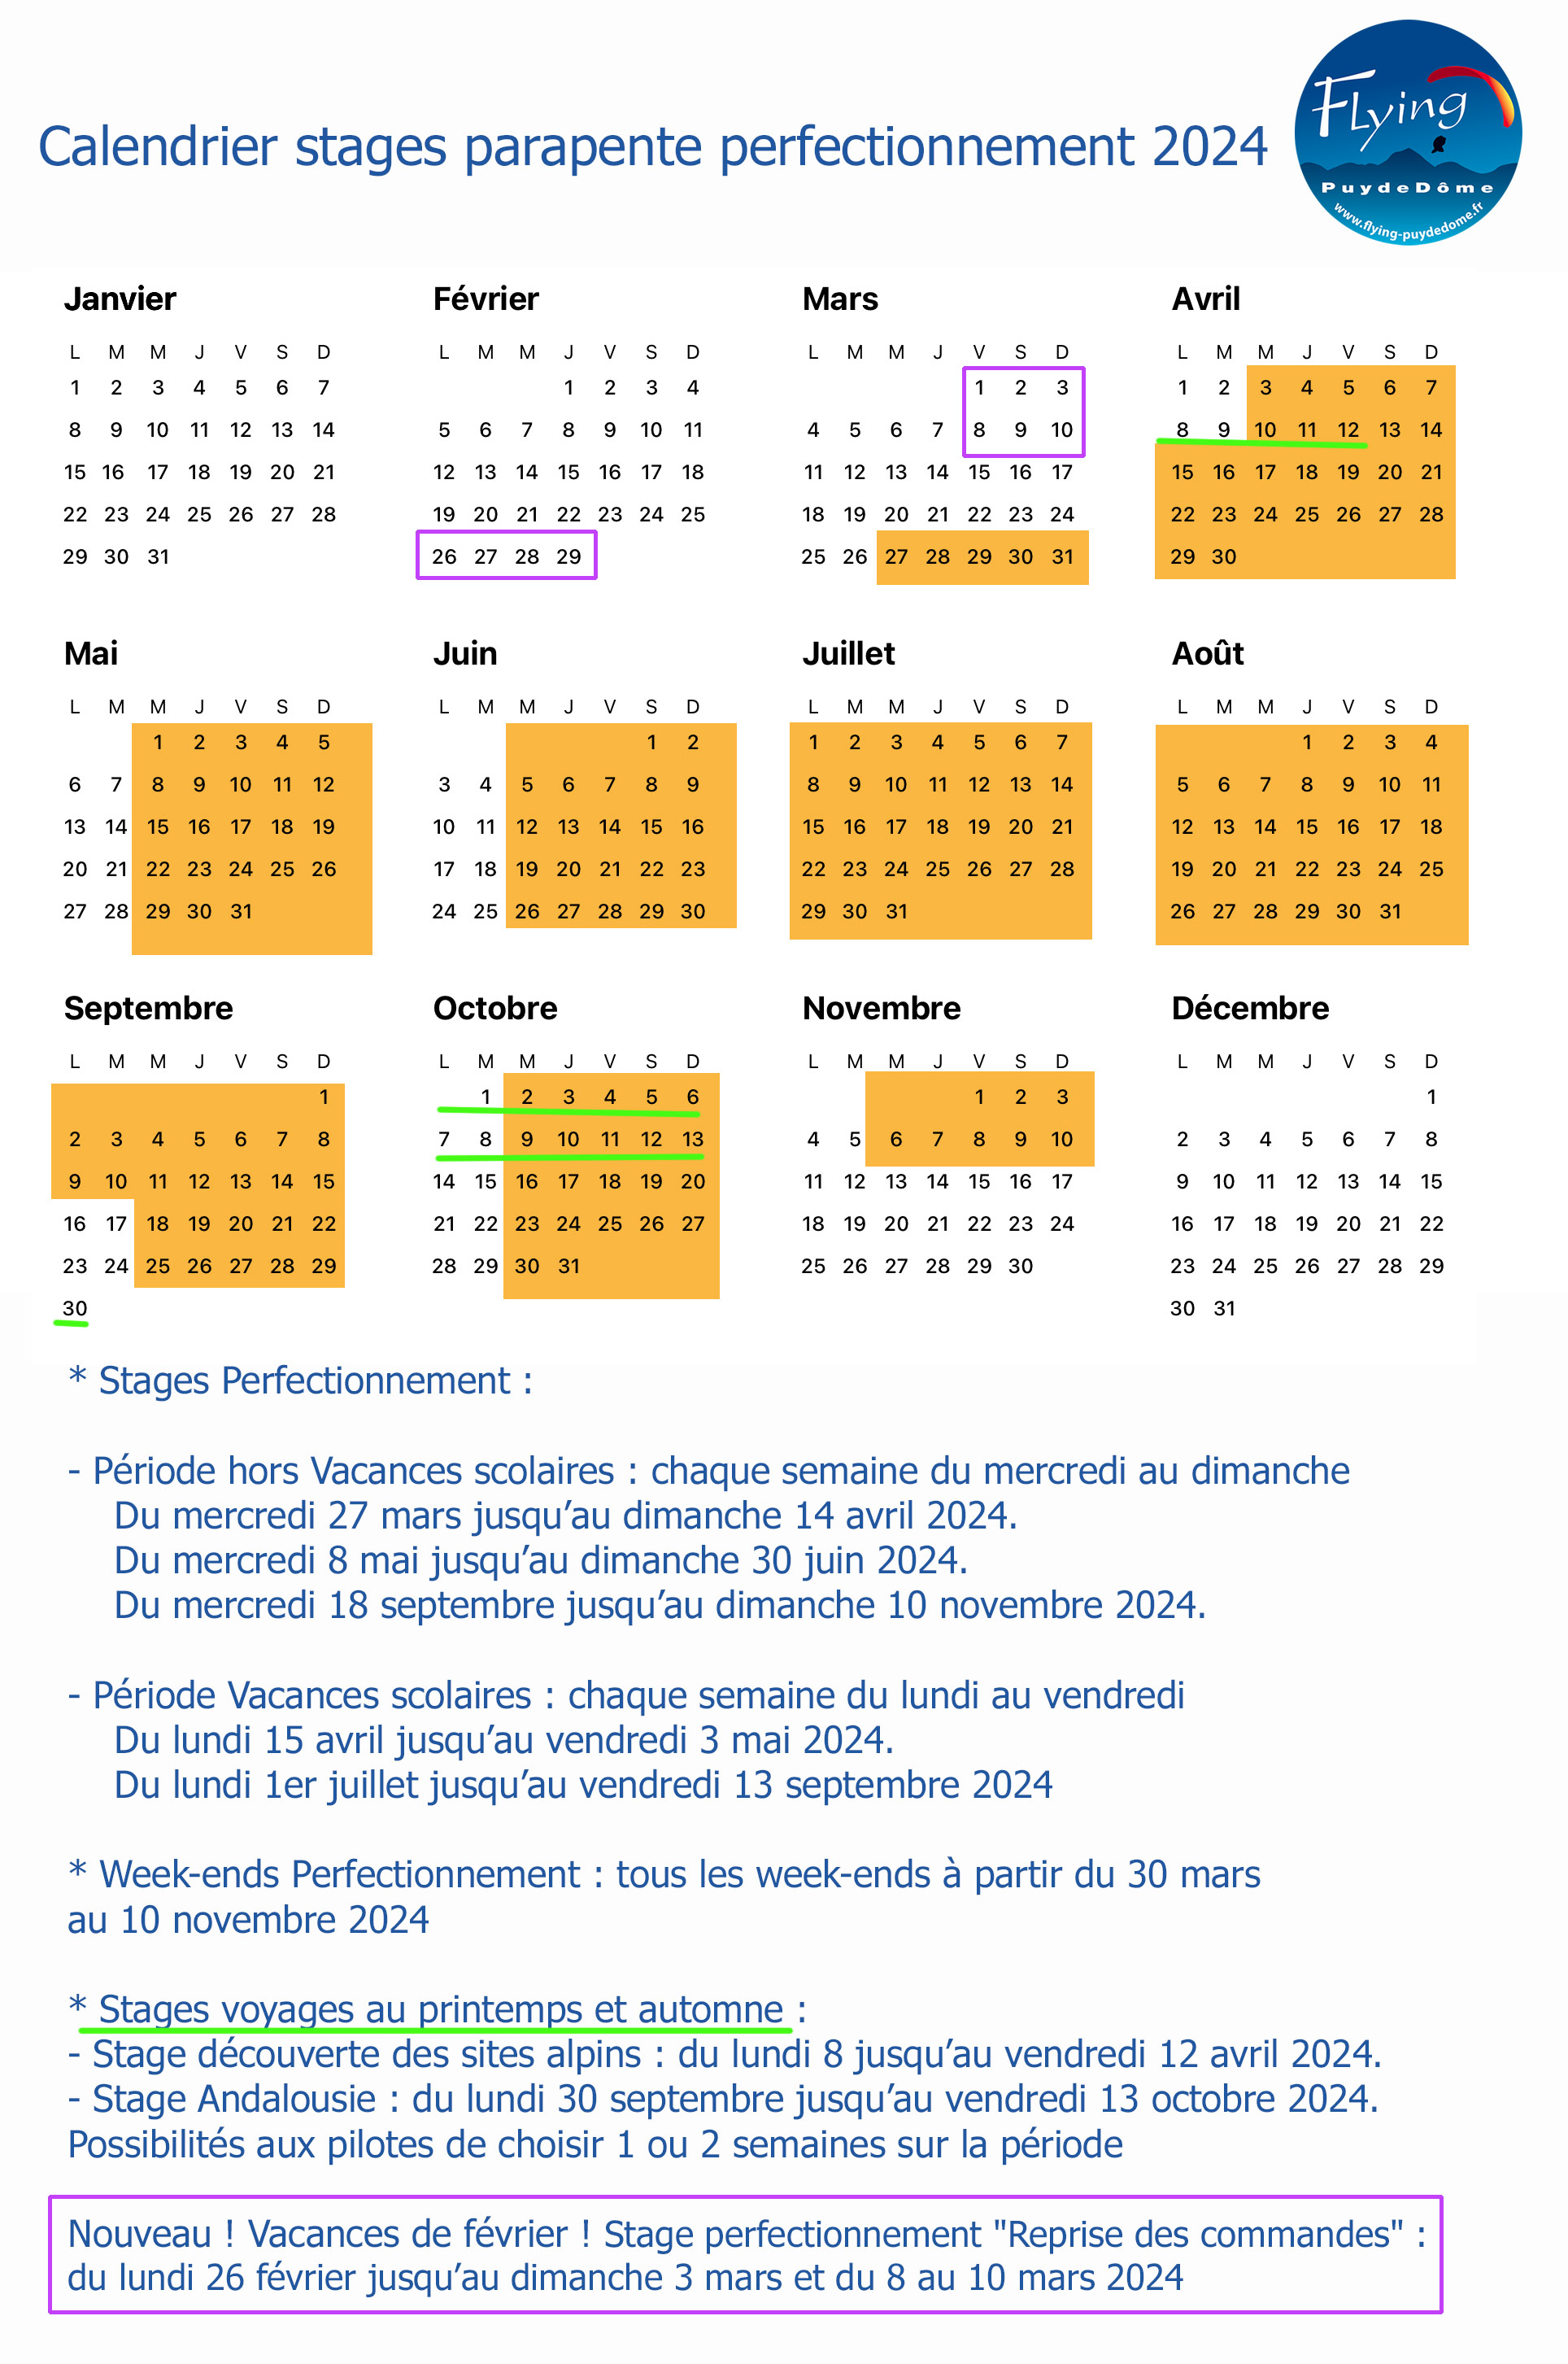 Calendrier stage perfectionnement 2024 FPDD